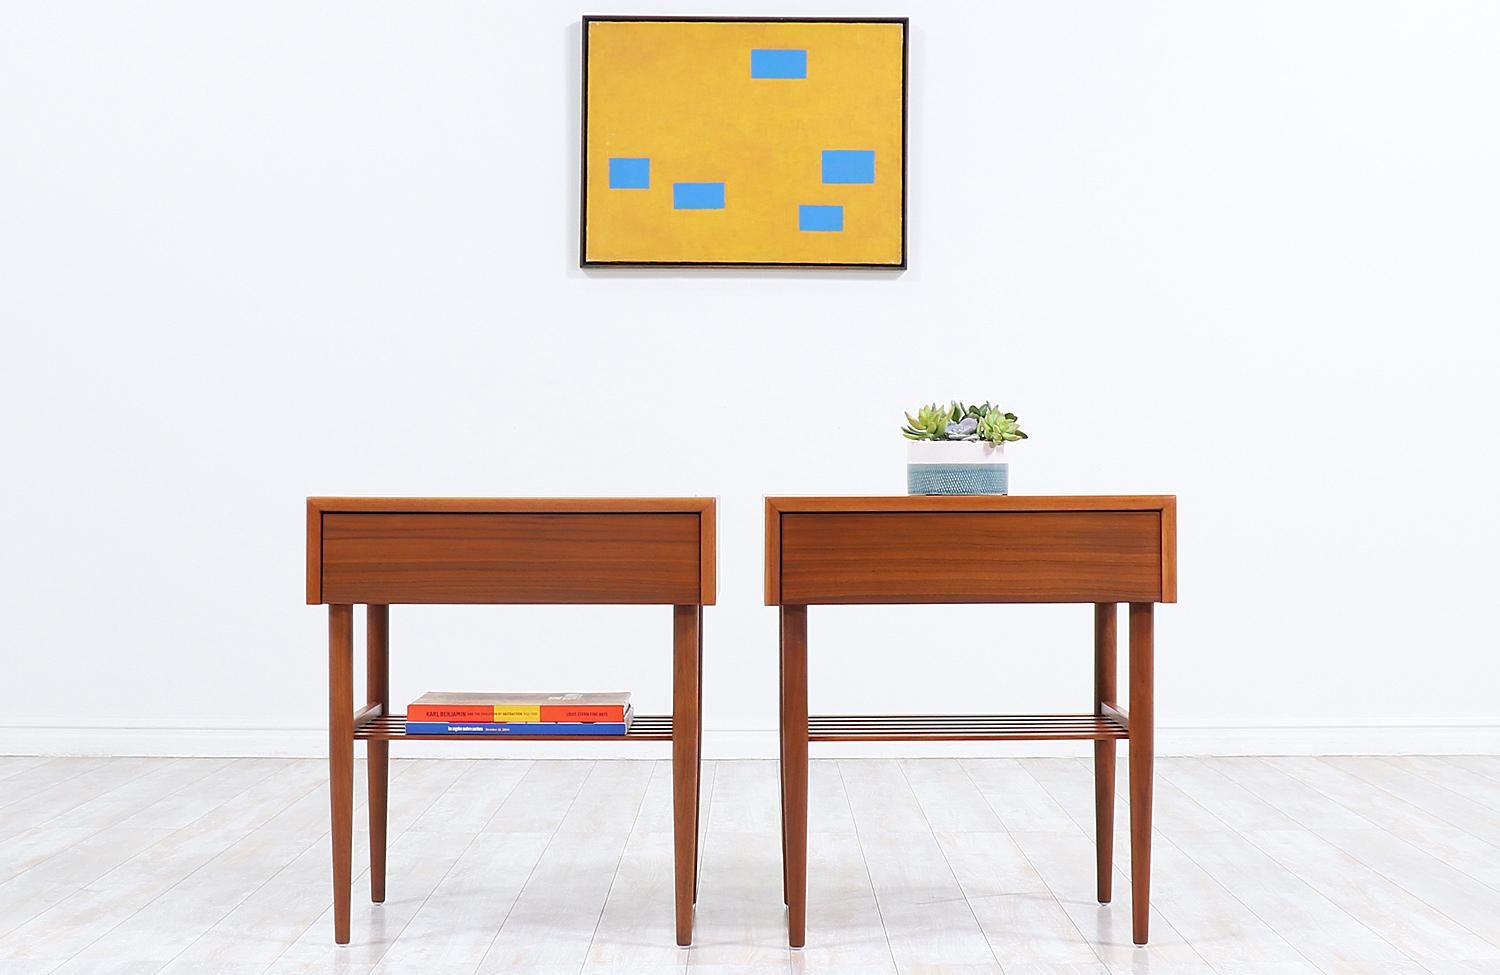 Spectacular pair of vintage nightstands designed by American designer John Keal in collaboration with California company, Brown Saltman, who operated in the city of Los Angeles in the 1950s. Our nightstands are crafted in warm walnut wood that